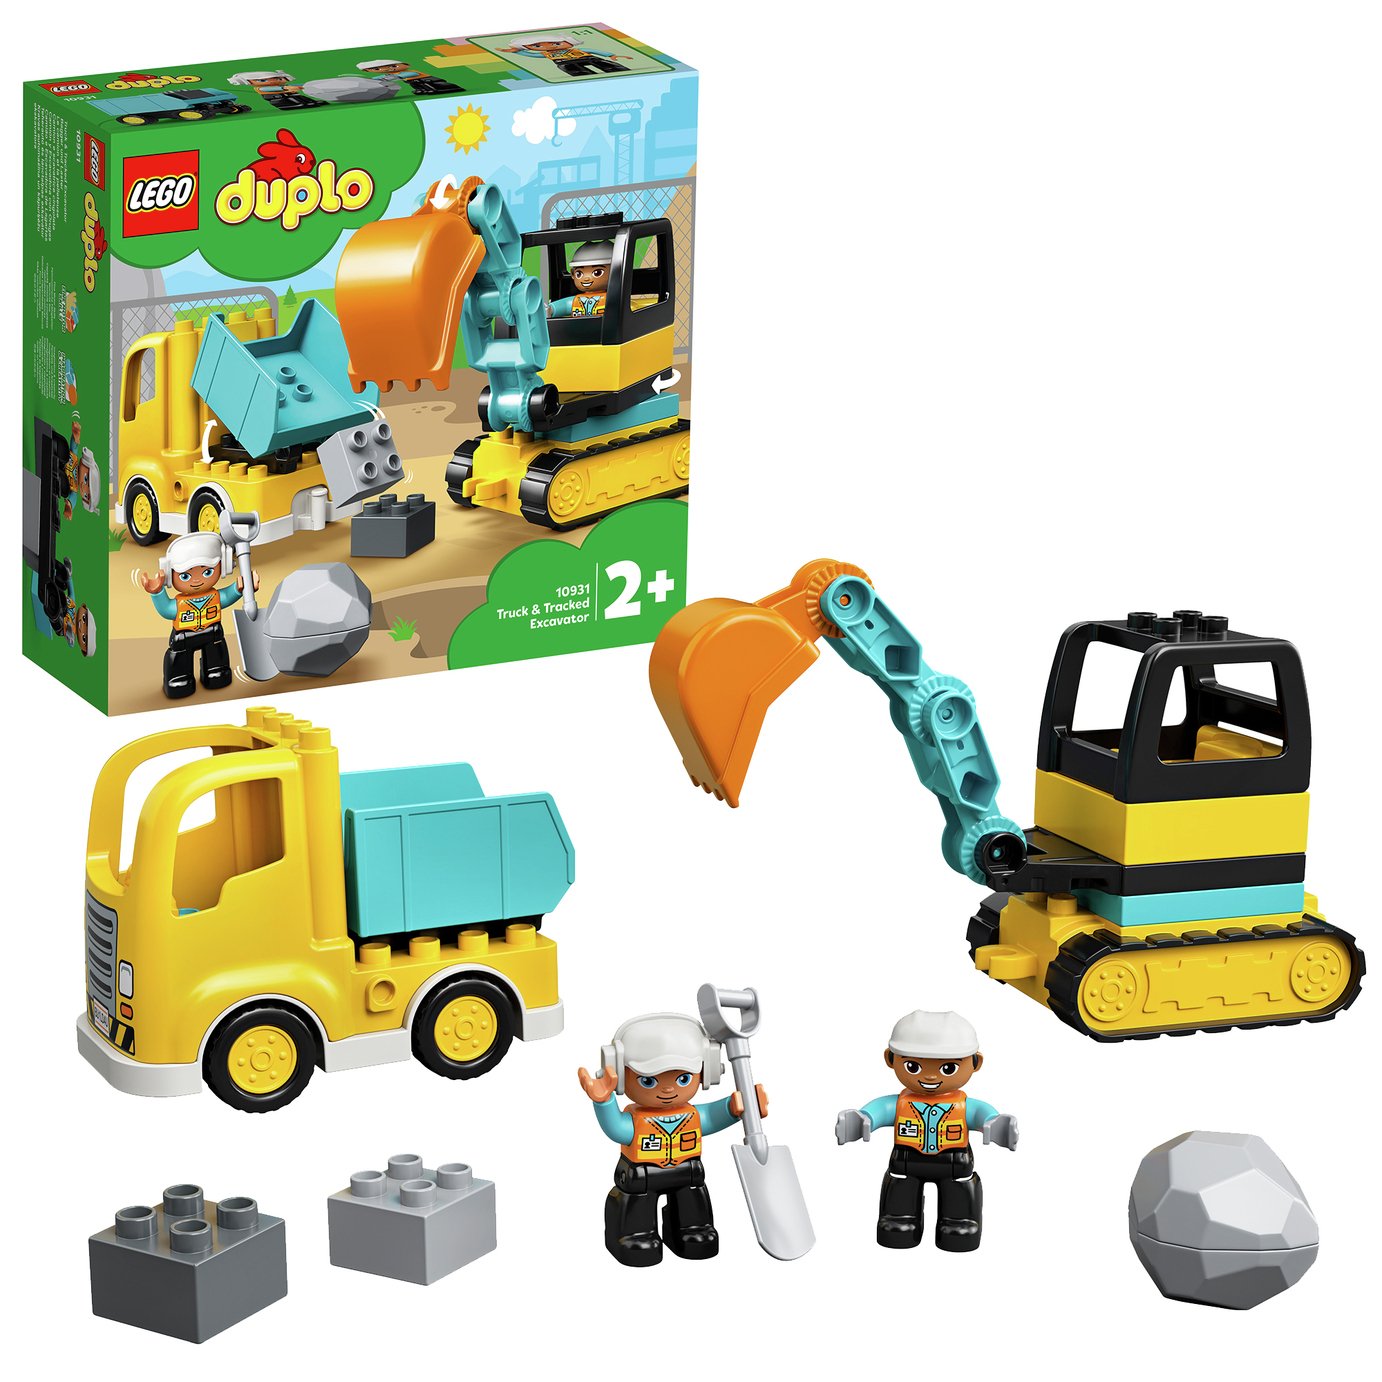 LEGO DUPLO Town Truck & Tracked Excavator Set 10931 review